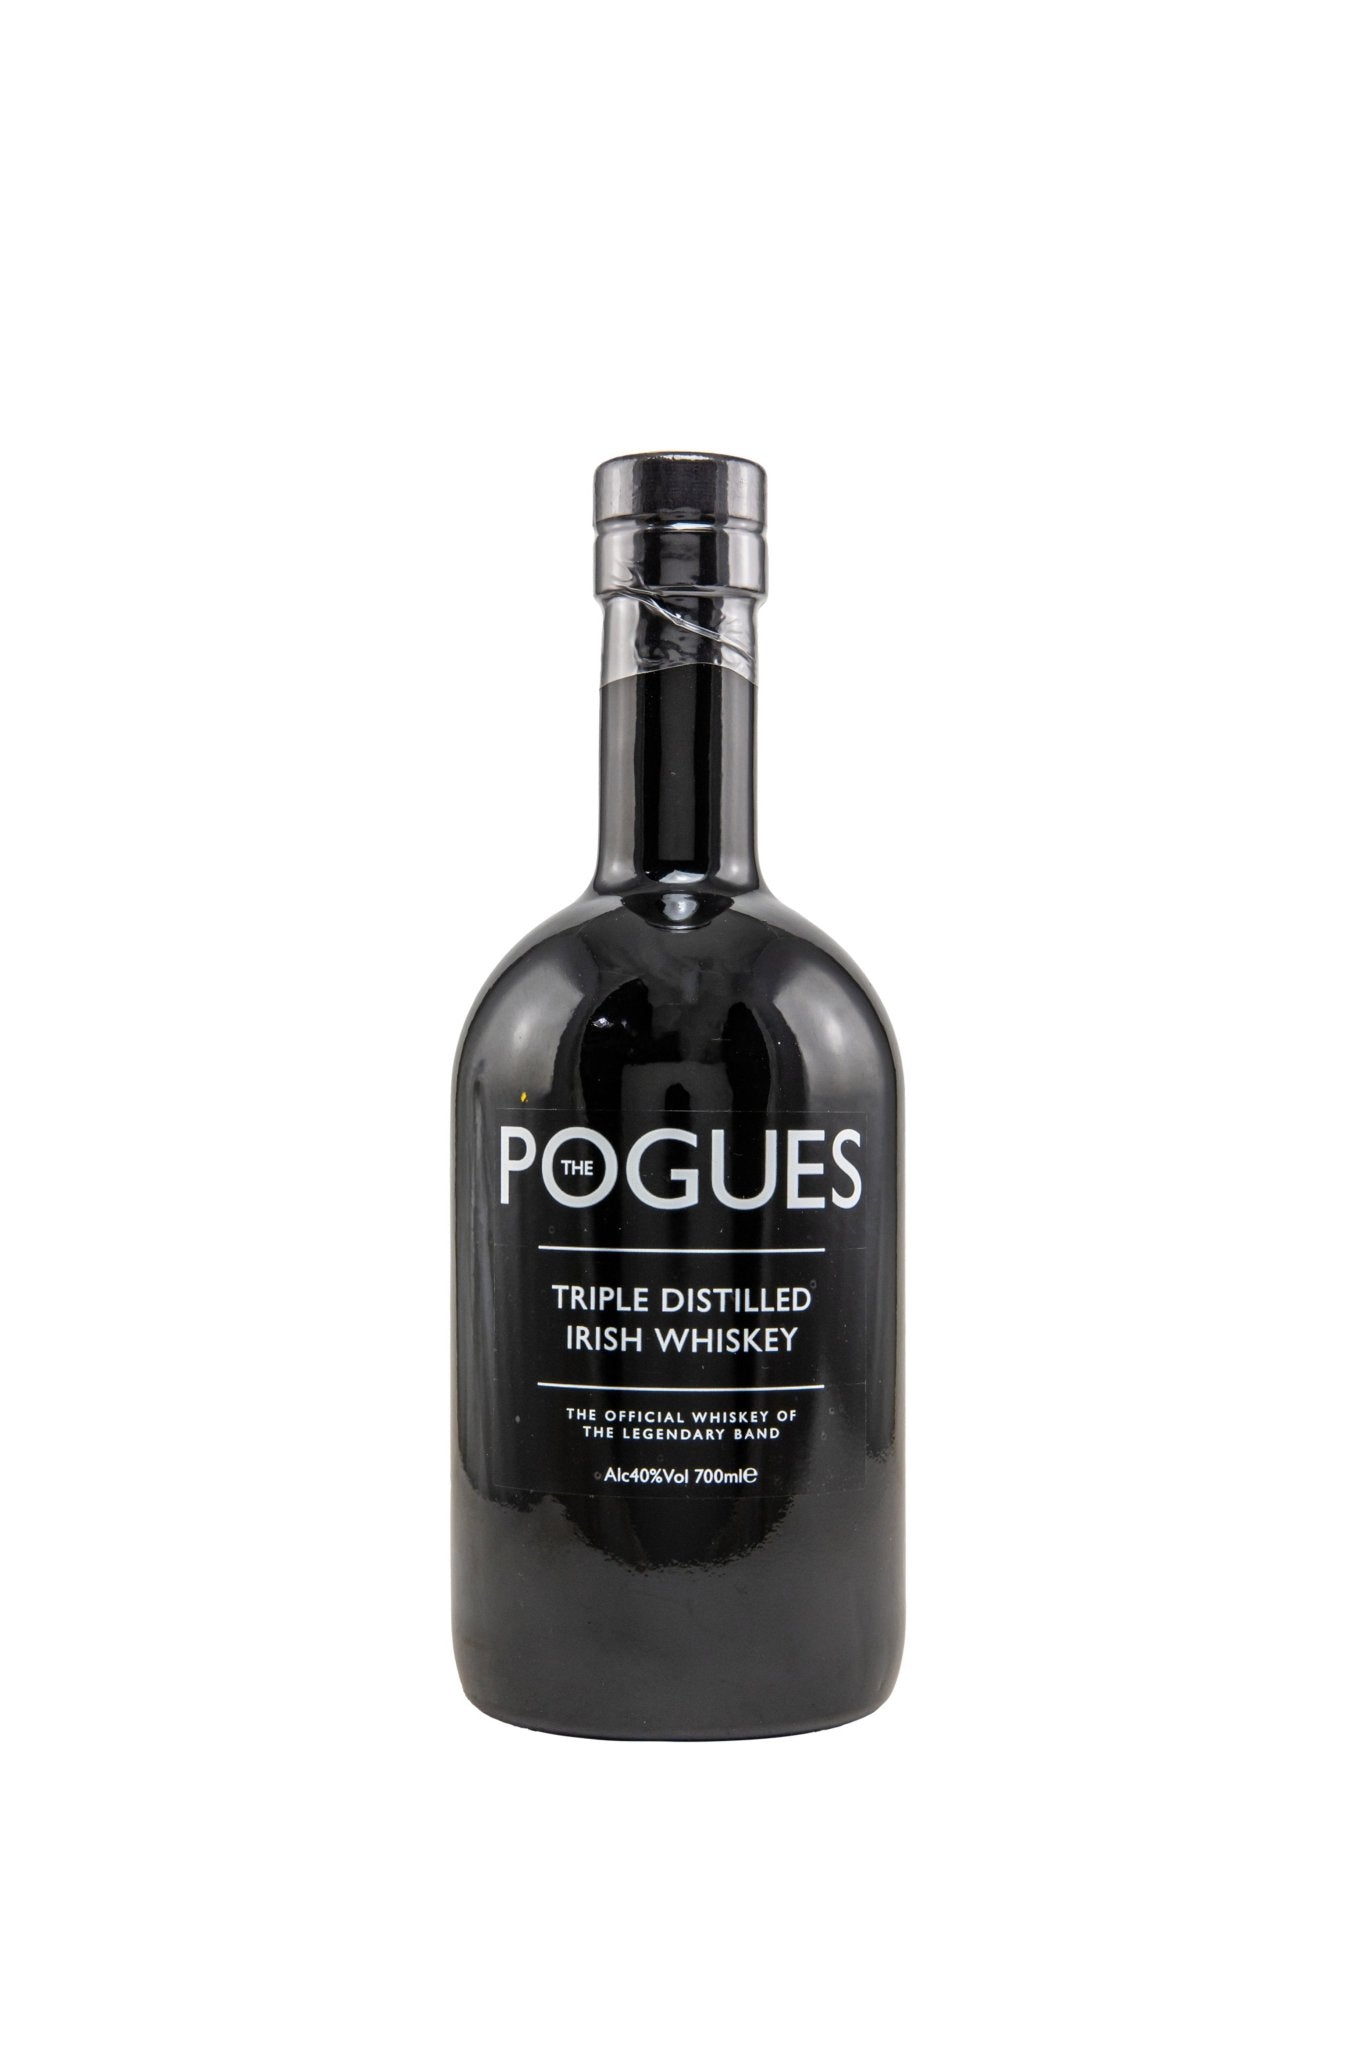 The Pogues Whiskey Blended Irish neue Flasche 40% 700ml - Maltimore